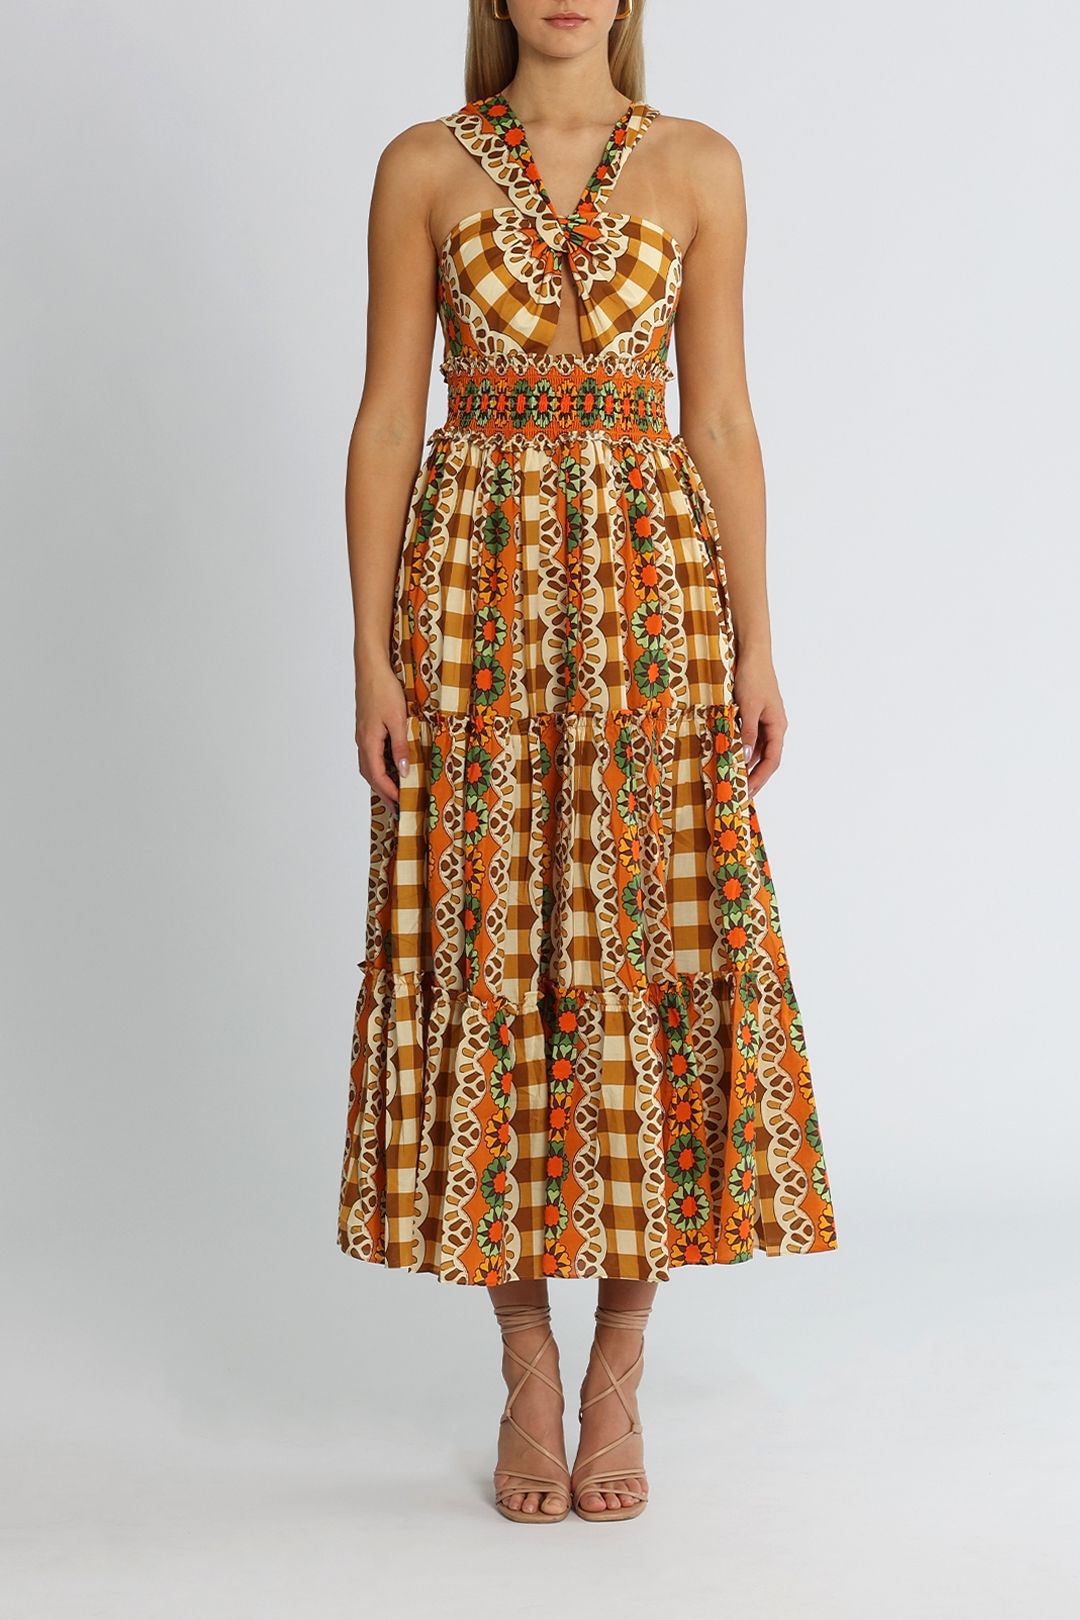 Alice McCall Dresses | Shop Alice McCall Clothing Online